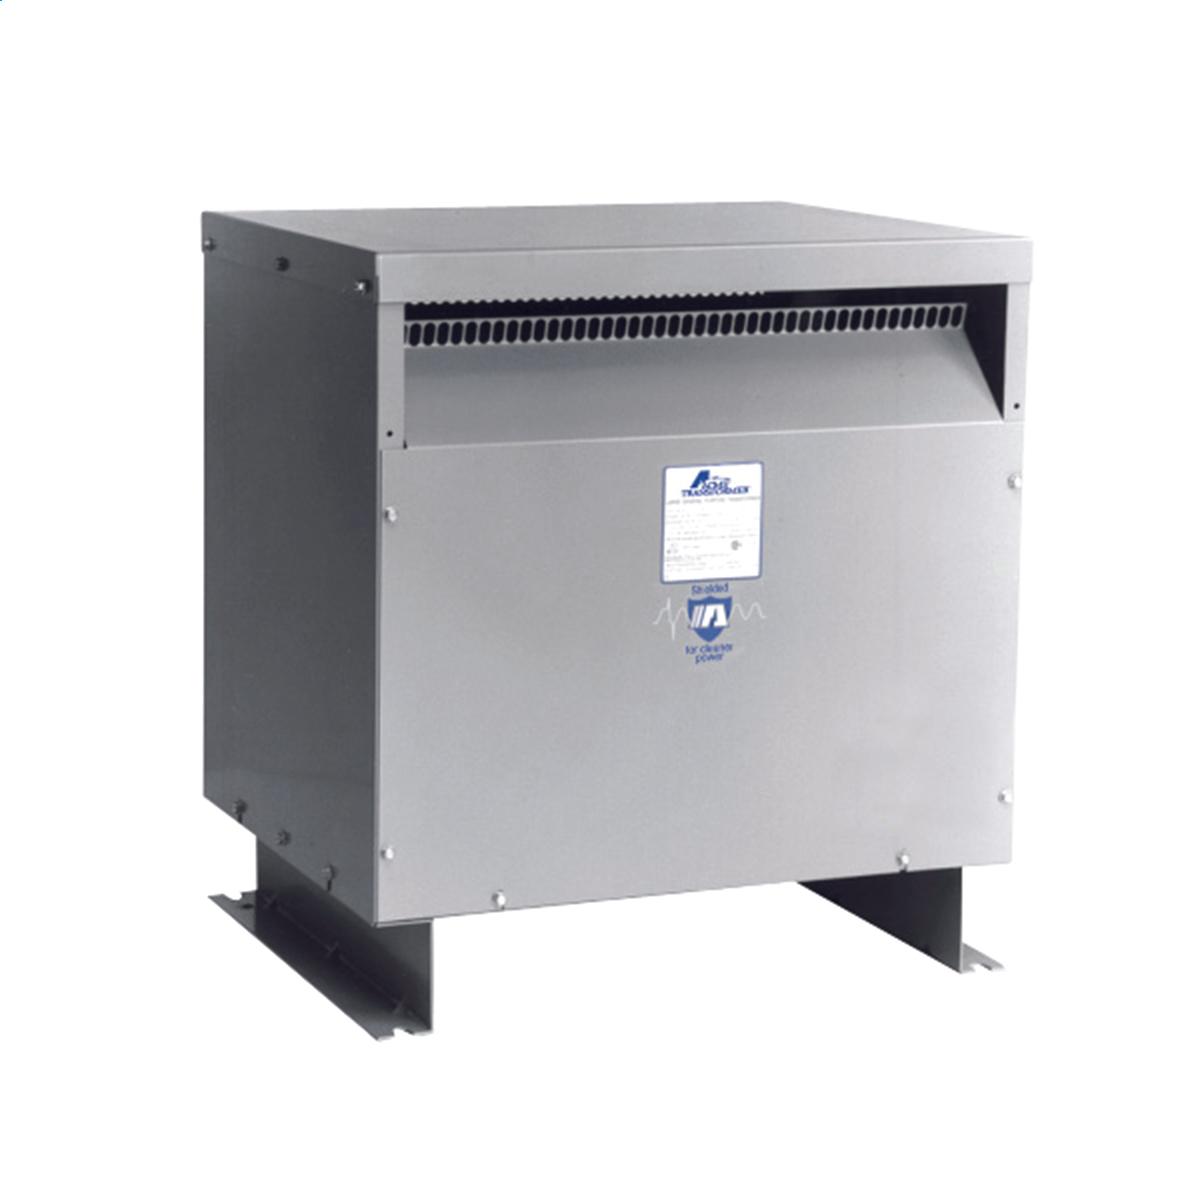 Hubbell WI045K10 Medium Voltage Transformer - Three Phase, 2400Δ - 208Y//120V, 45kVA  ; Lower operating cost over Liquid-filled ; No additional fireproofing or venting ; Long life expectancy ; Smaller, lighter easy to maintain